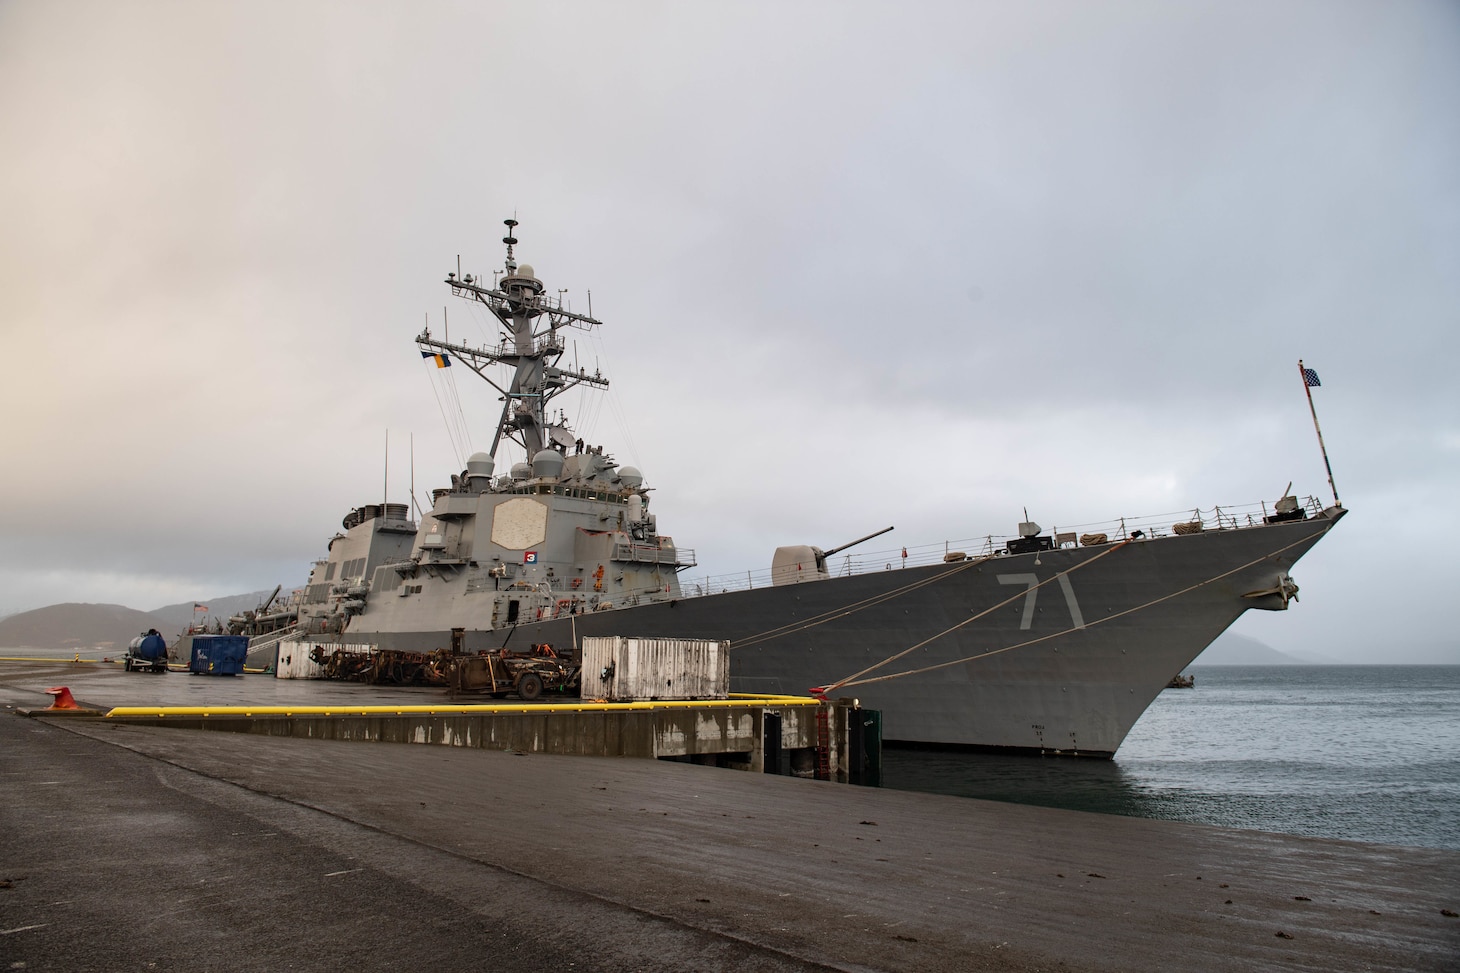 The Arleigh Burke-class guided-missile destroyer USS Ross (DDG 71) is moored to a pier in Tromso, Norway, Nov. 3, 2020.